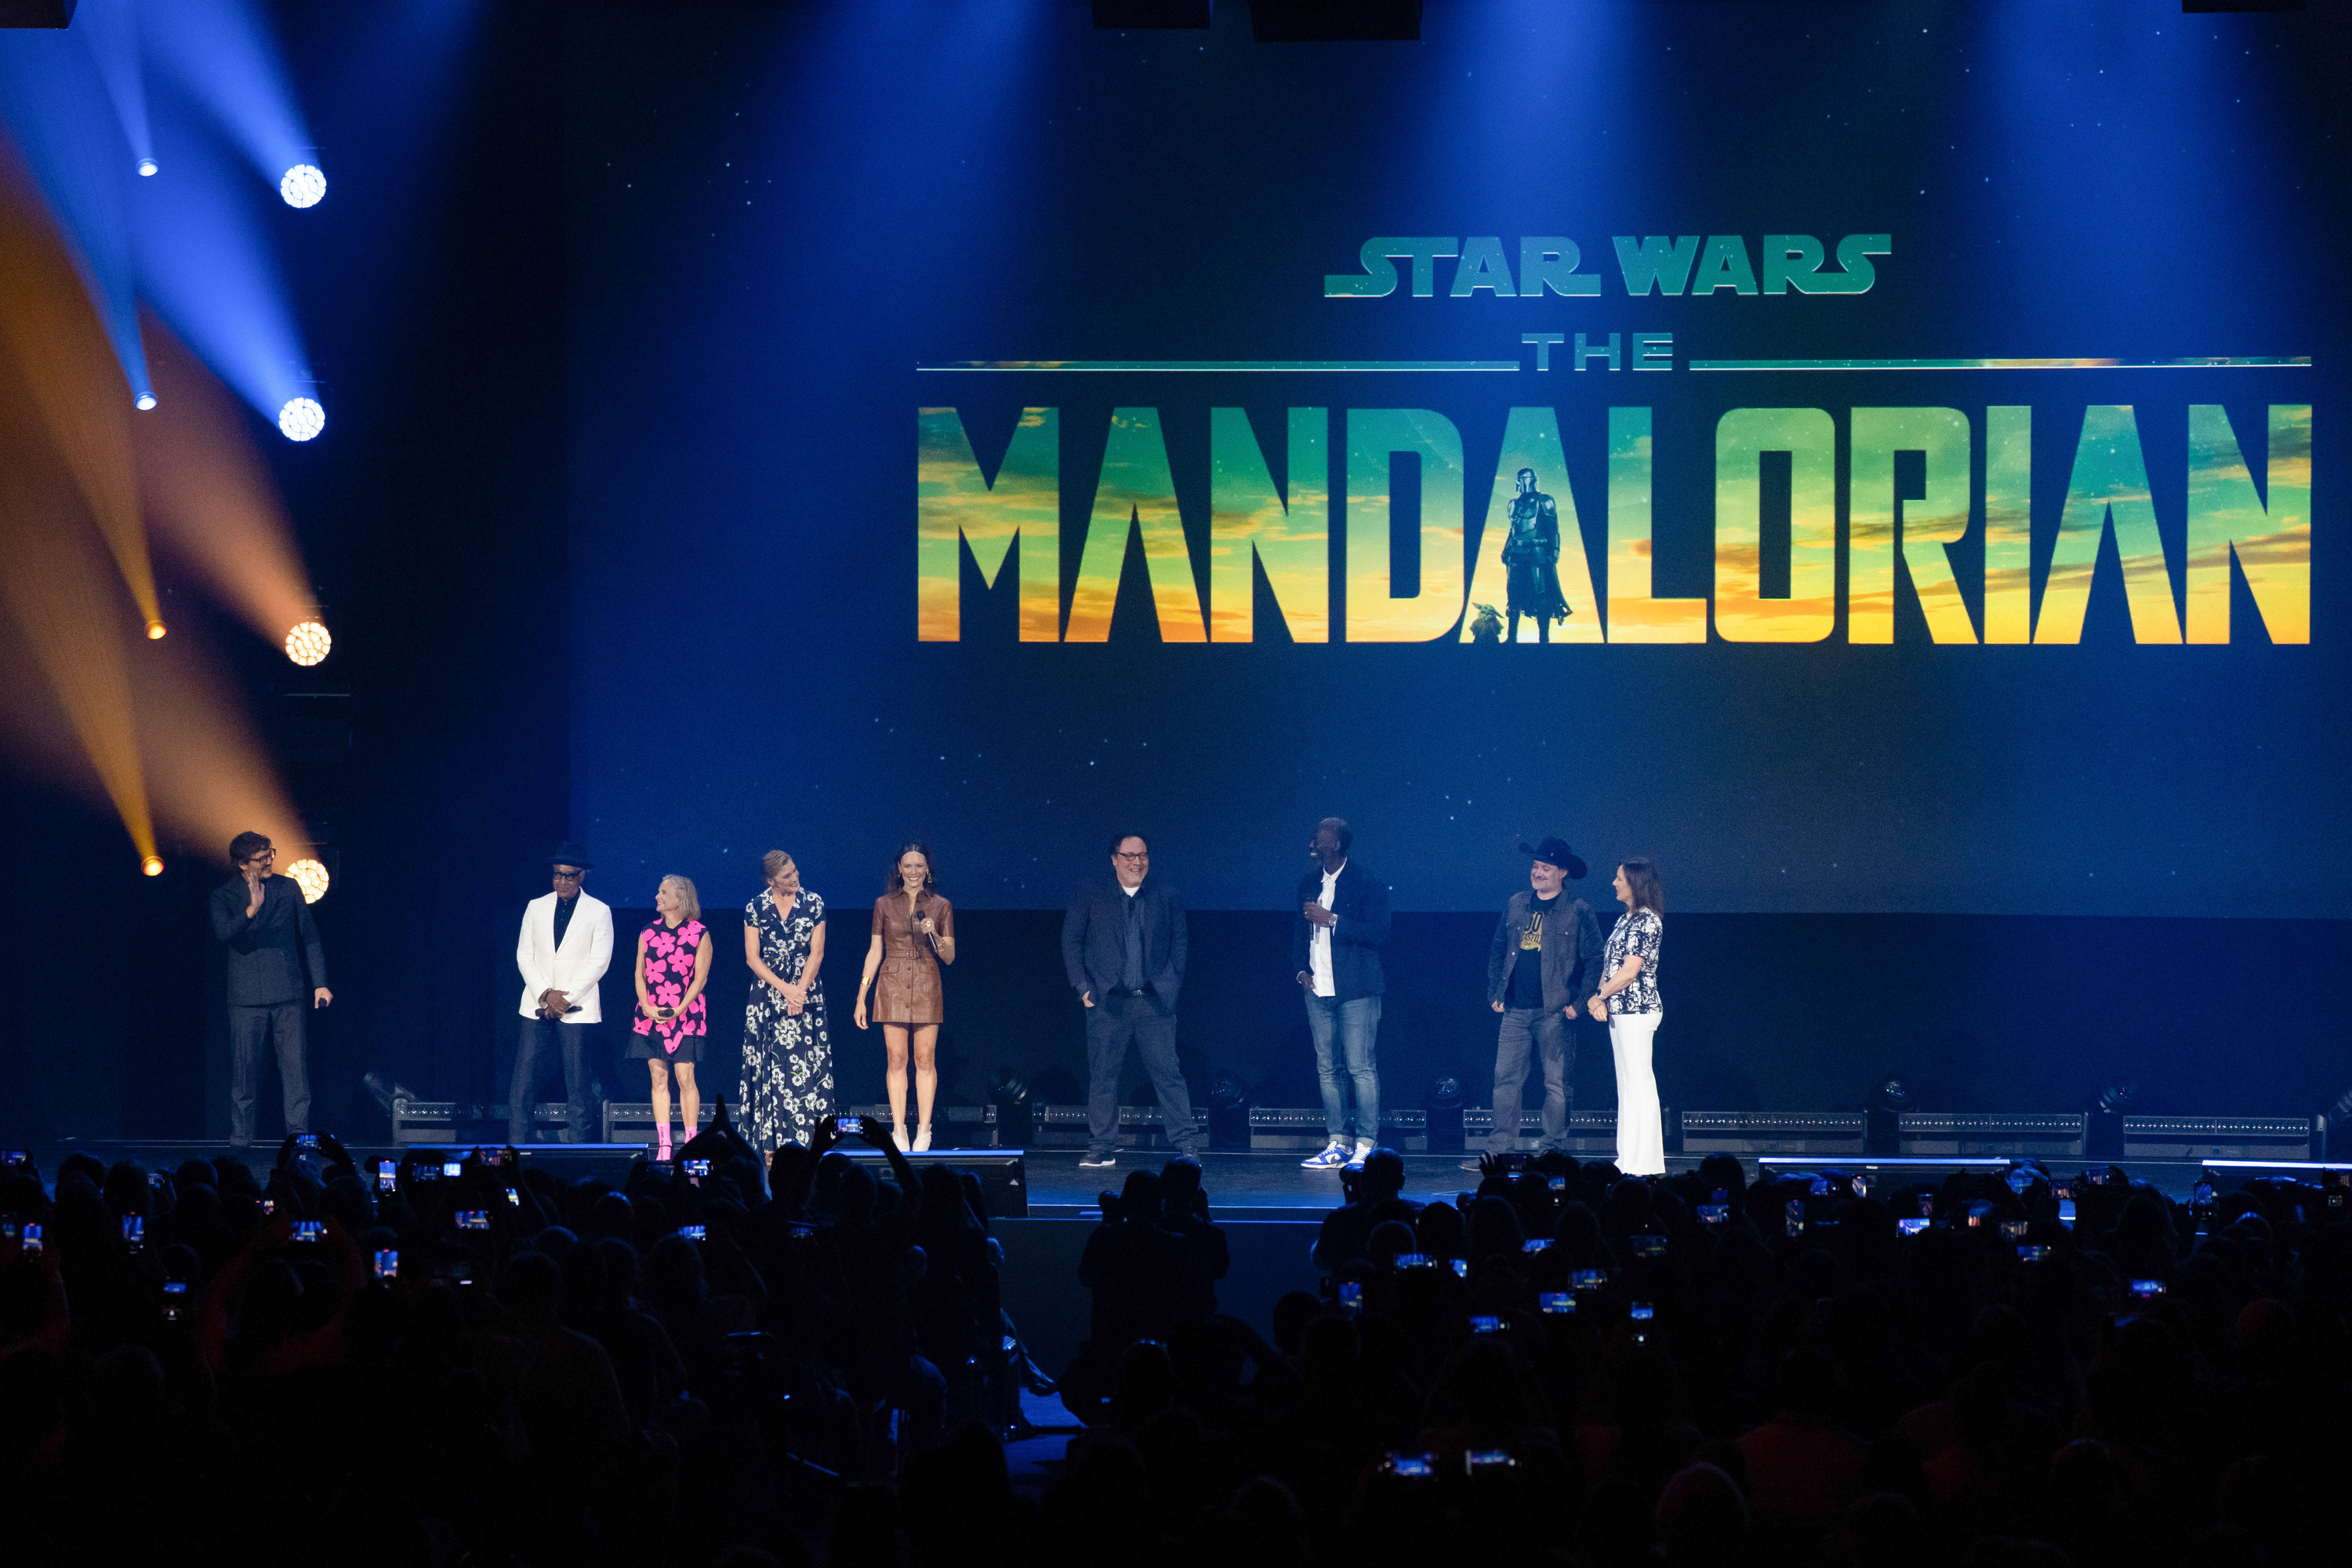 The cast and crew behind The Mandalorian introduce fans to the premiere of The Mandalorian&#x27;s third season trailer at D23 Expo in 2022.